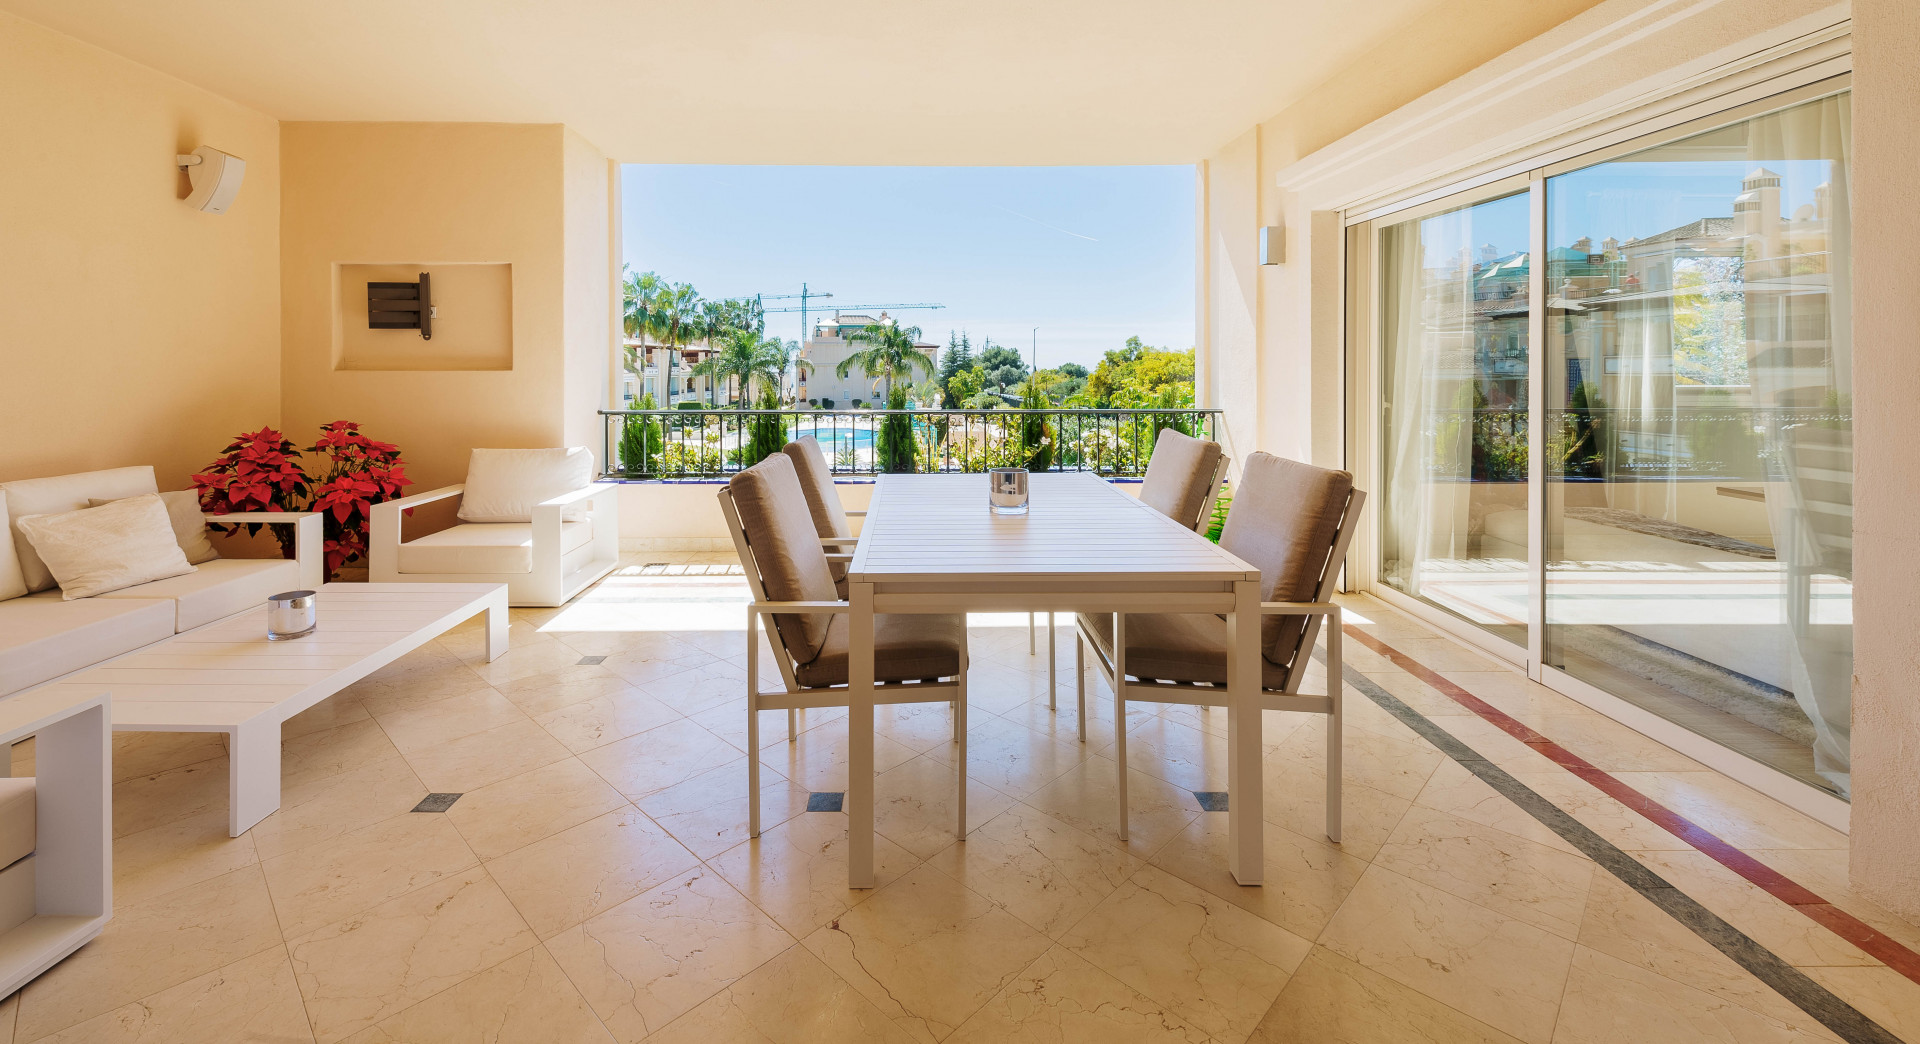 A stunning four bedroom apartment located in Lomas de Sierra Blanca.